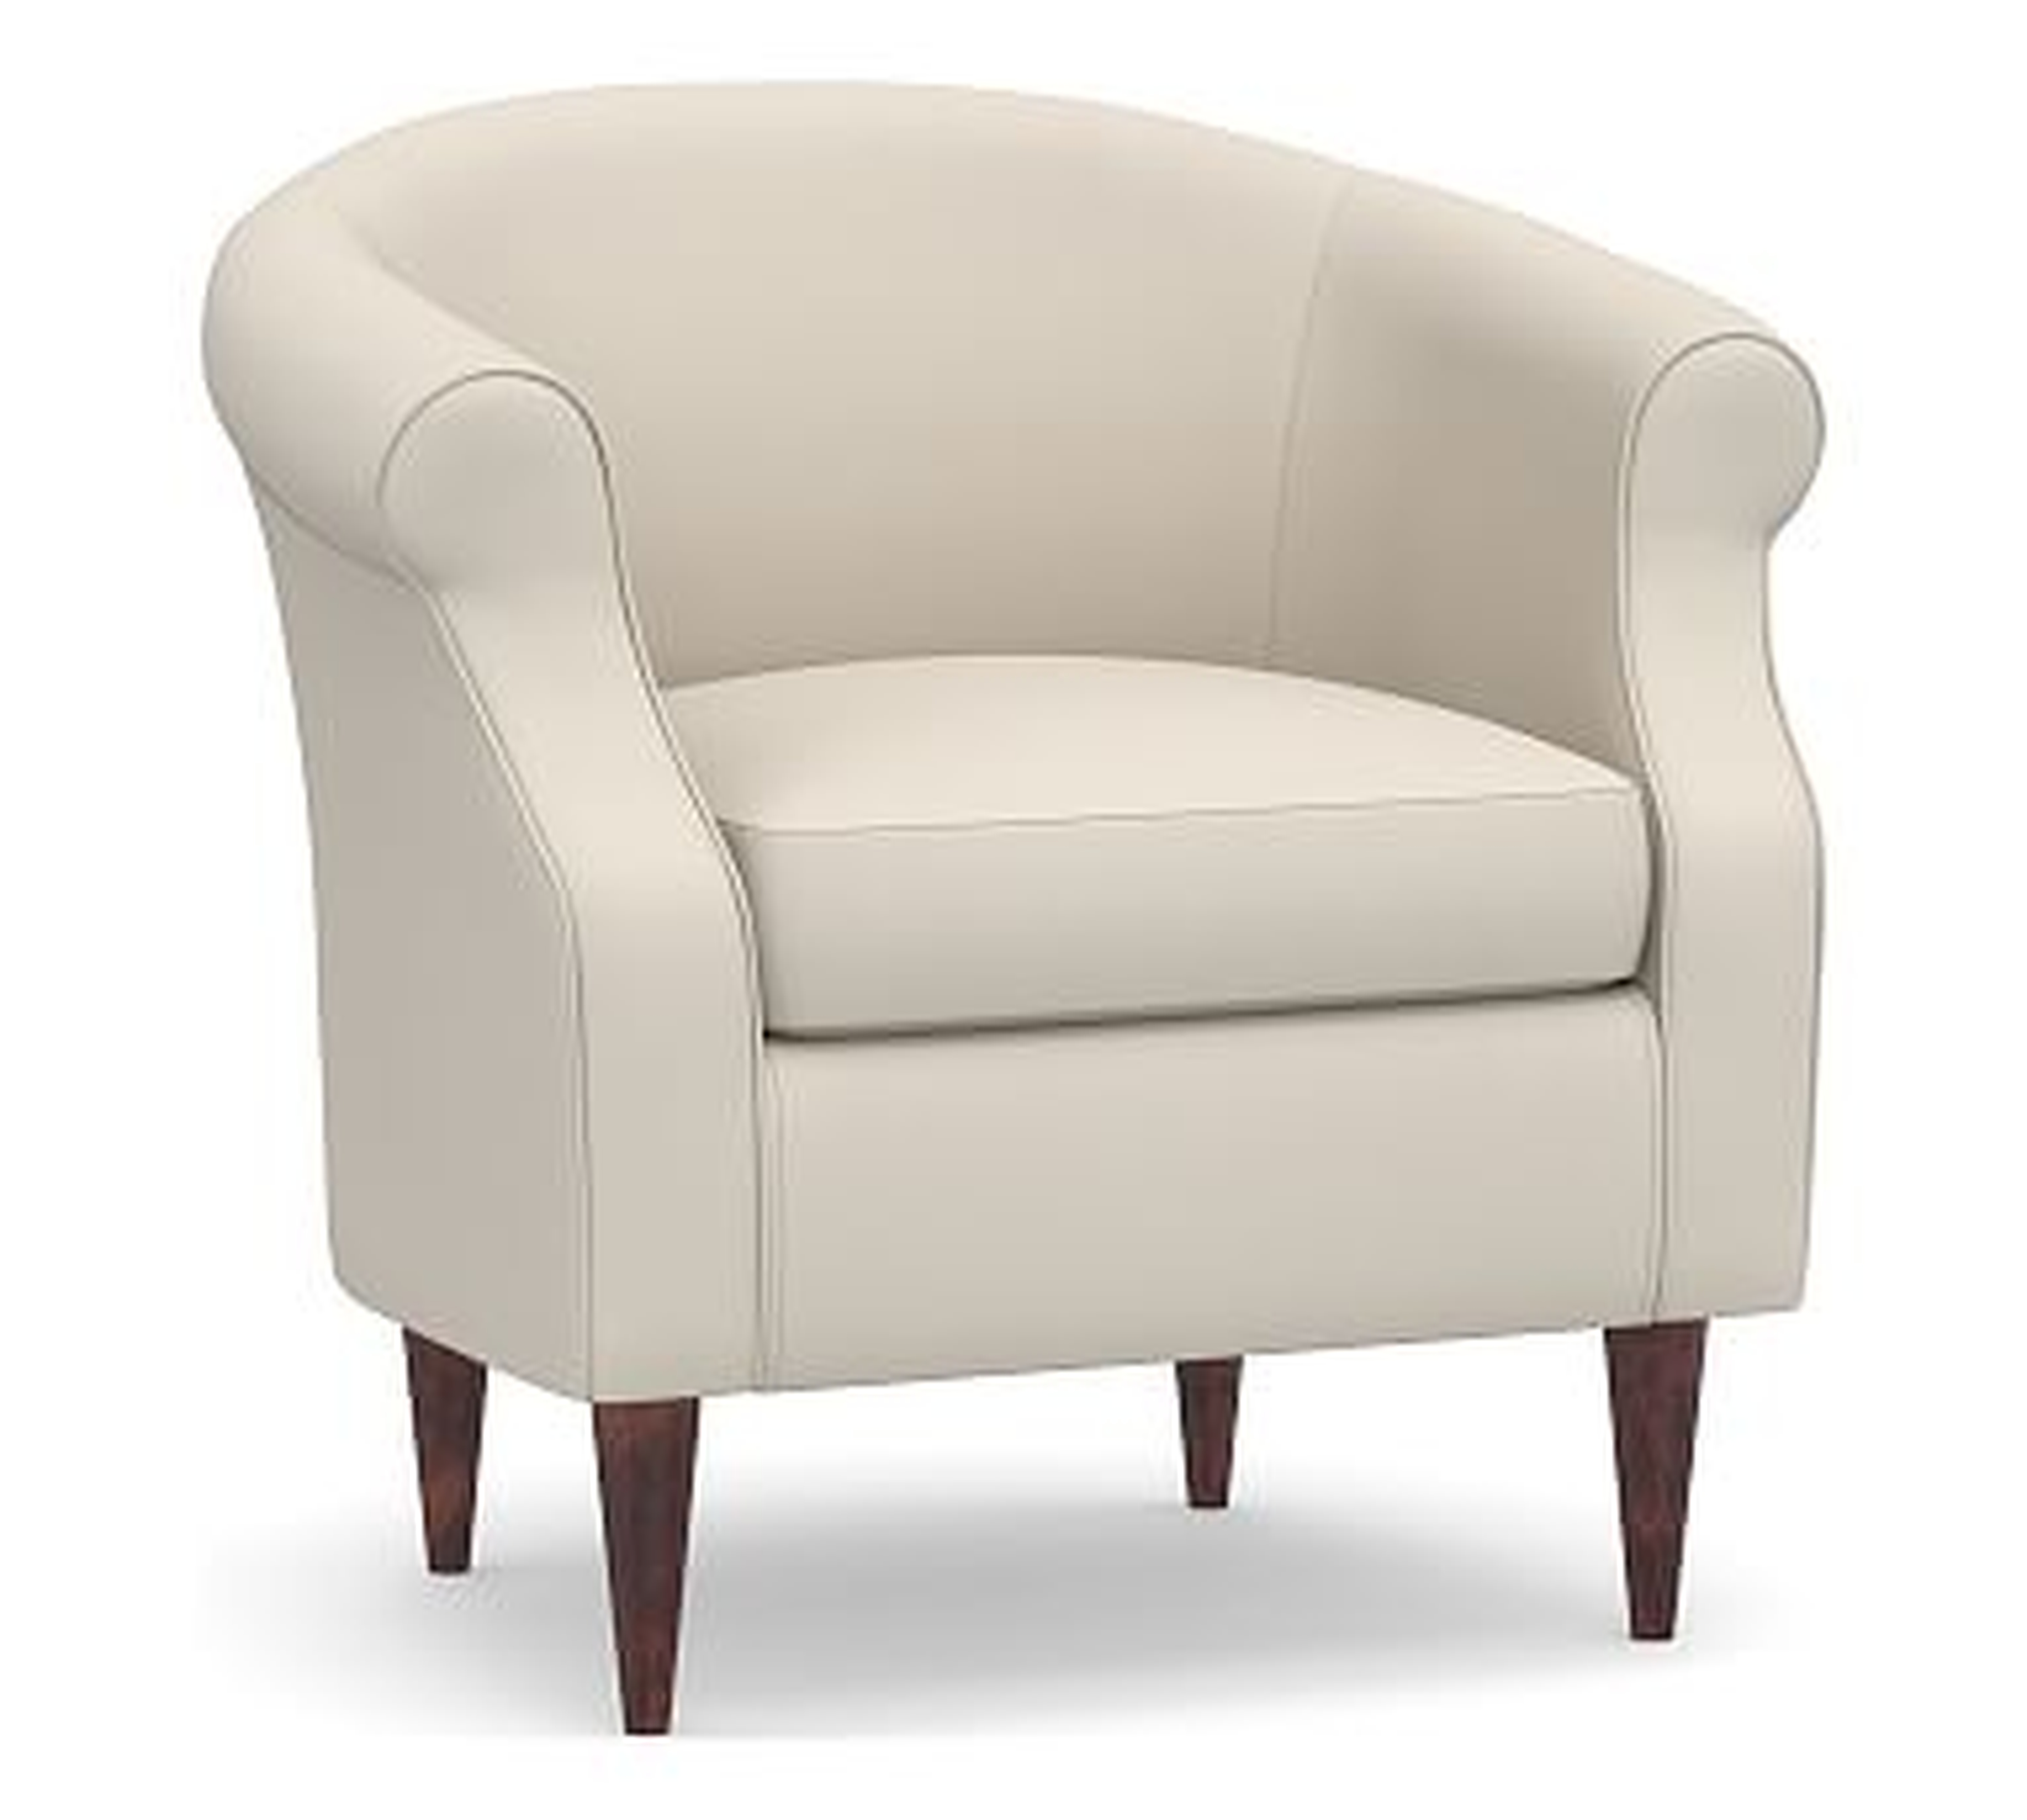 SoMa Lyndon Upholstered Armchair, Polyester Wrapped Cushions, Performance Twill Cream - Pottery Barn